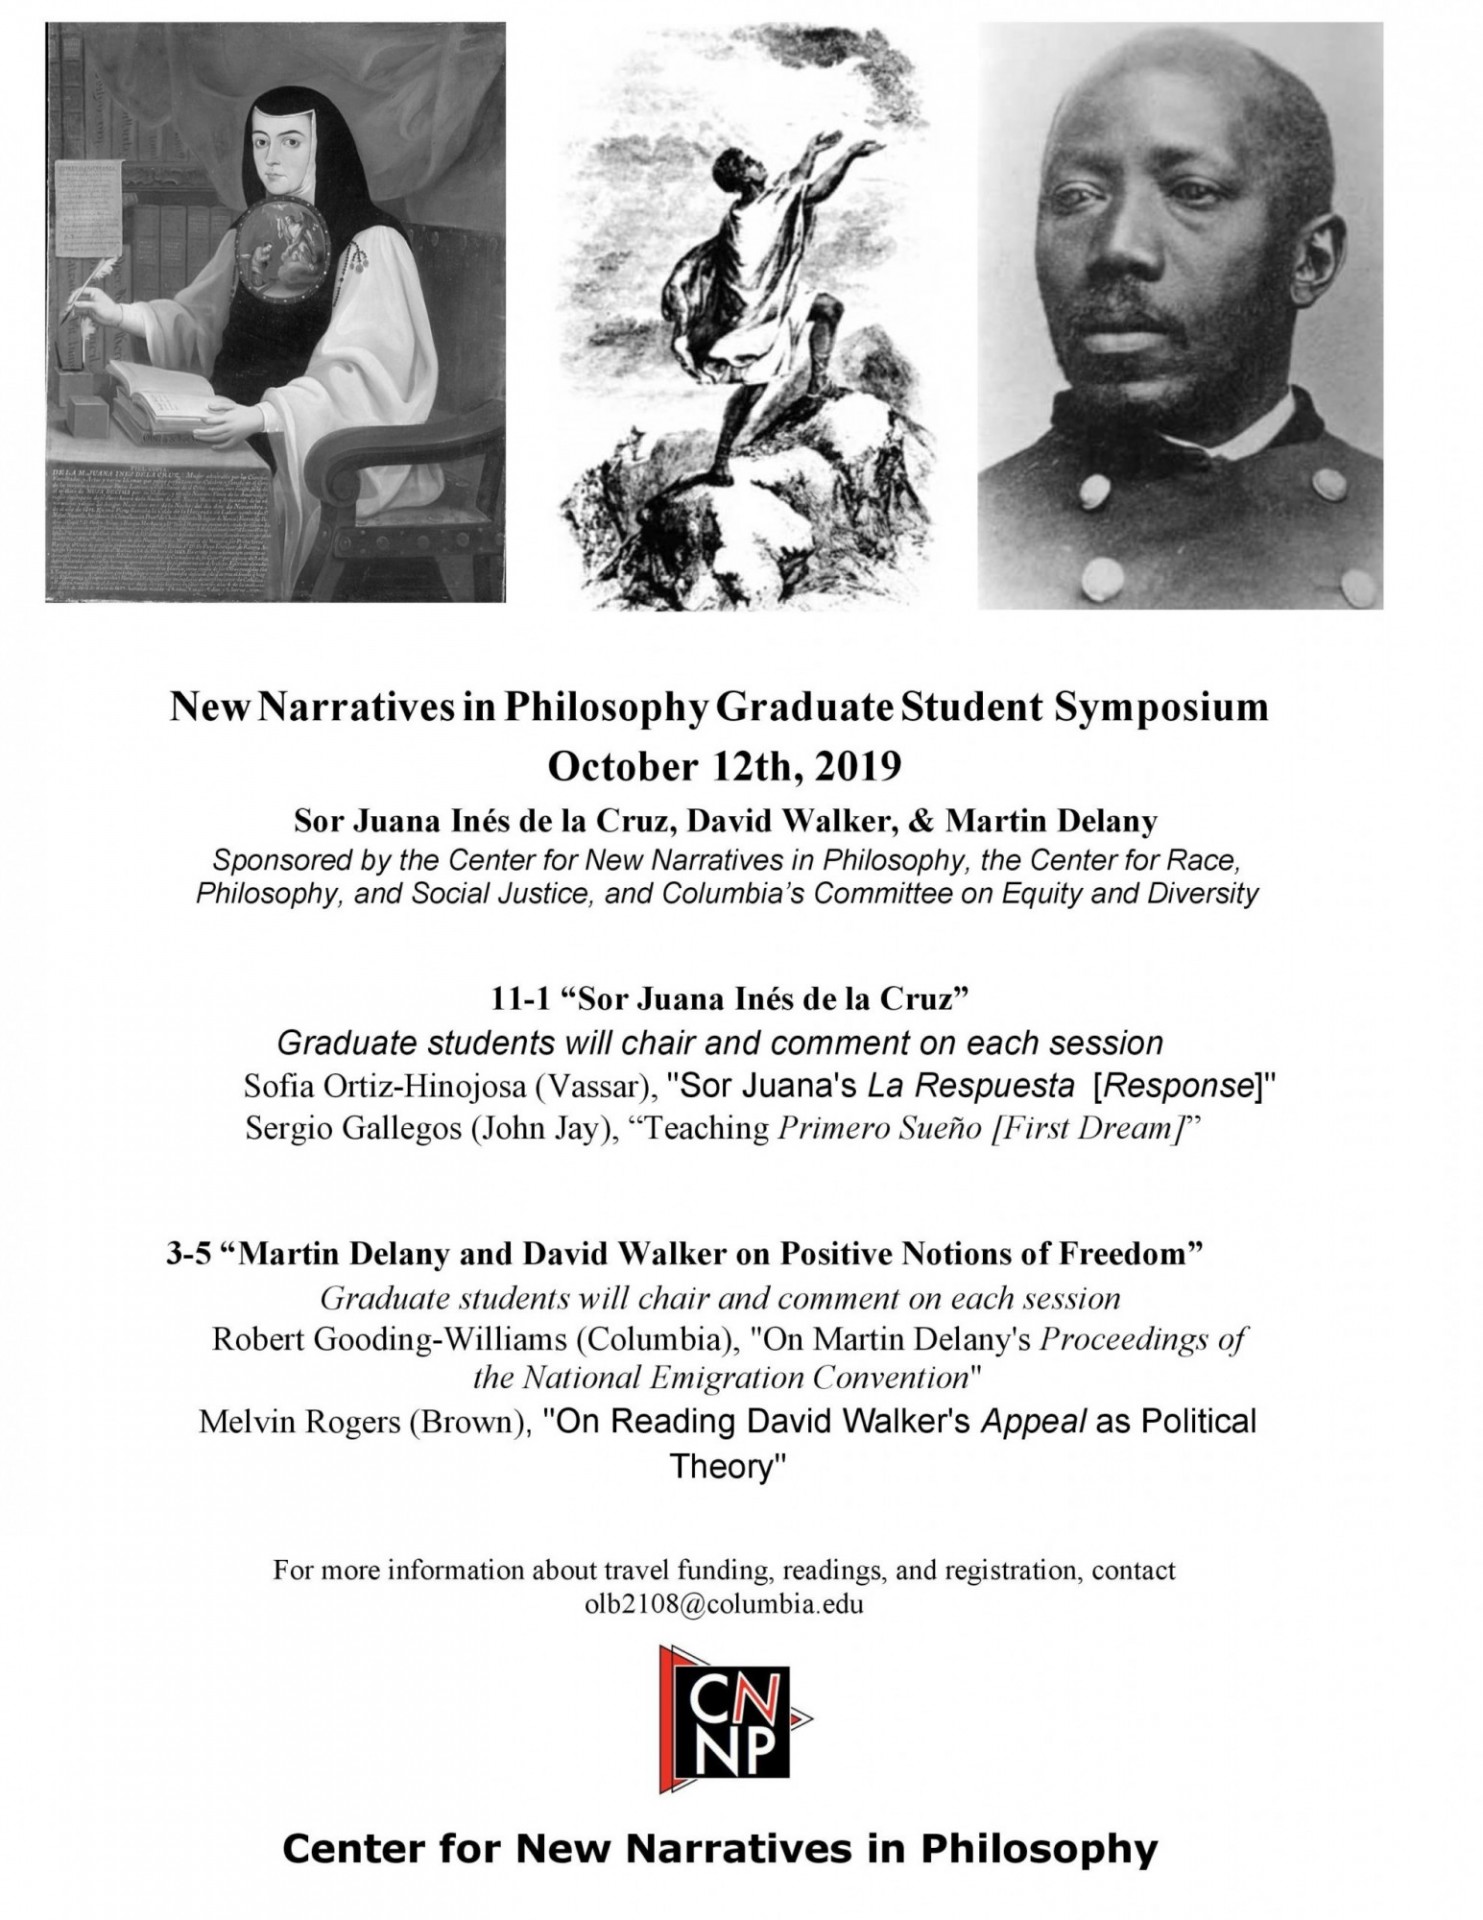 Poster for the New Narratives in Philosophy Graduate Student Symposium